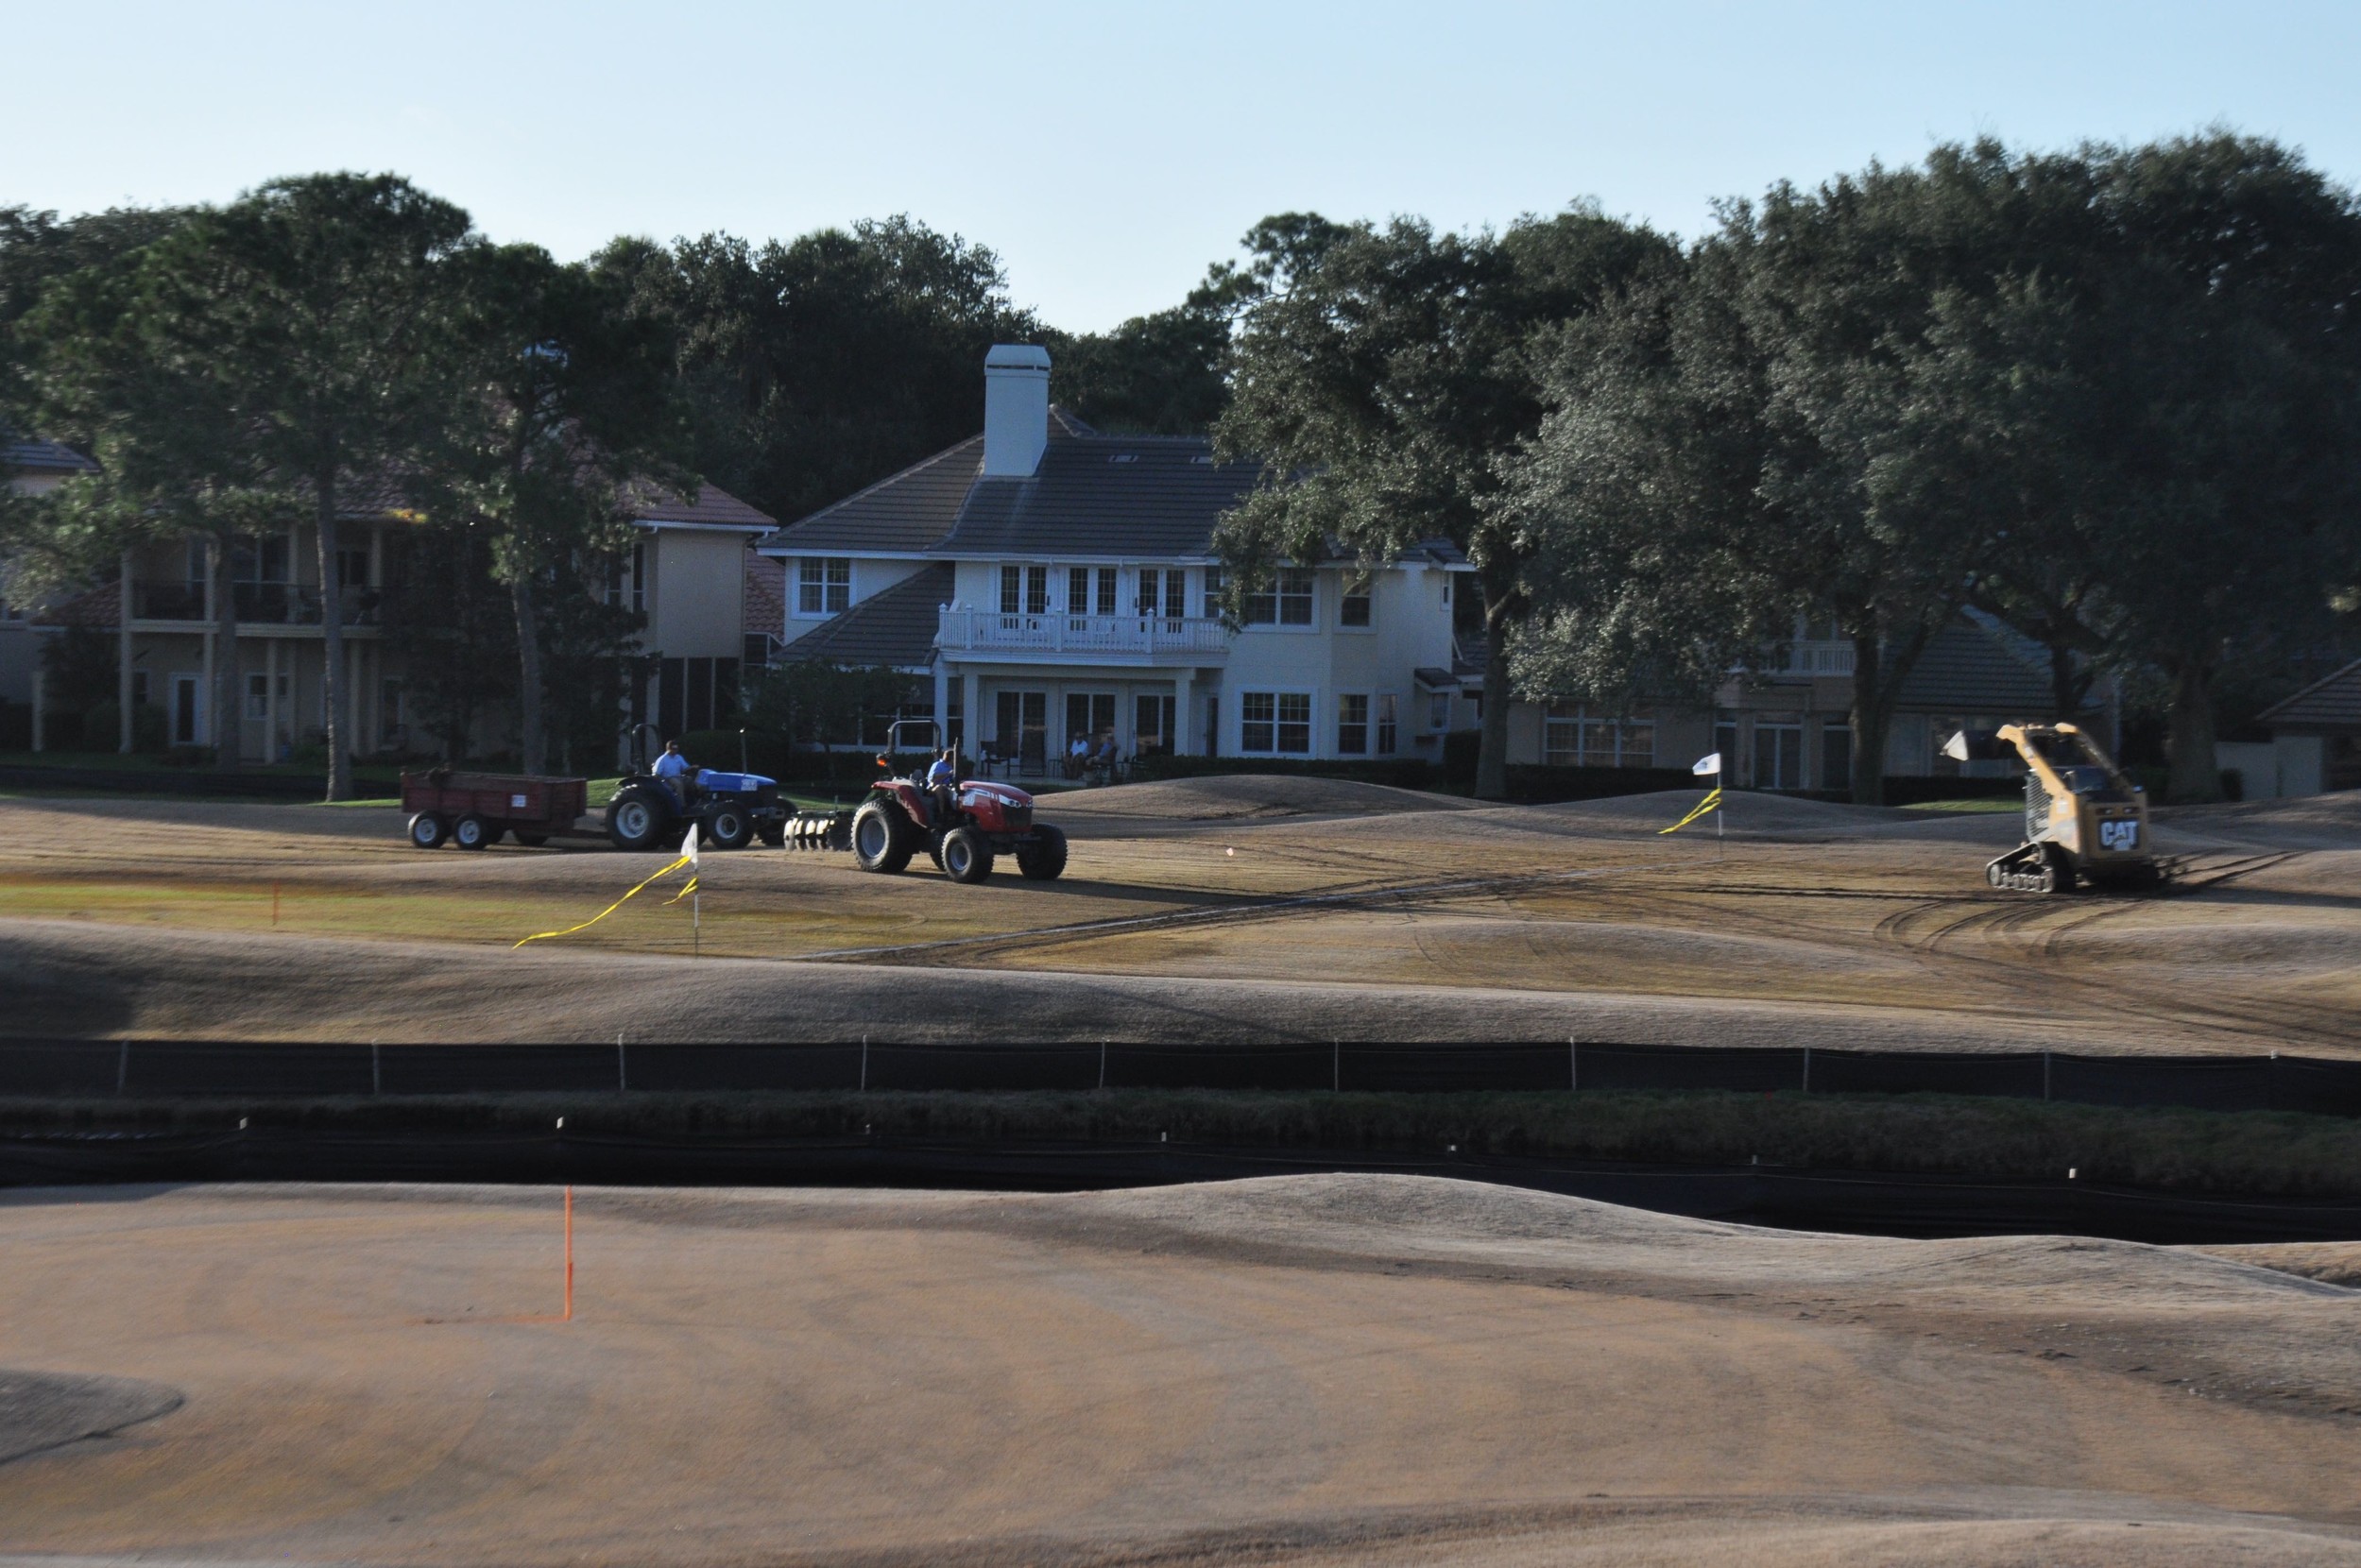 As part of the events on Sept. 19, a bulldozer and tractor raced down the 18th fairway.